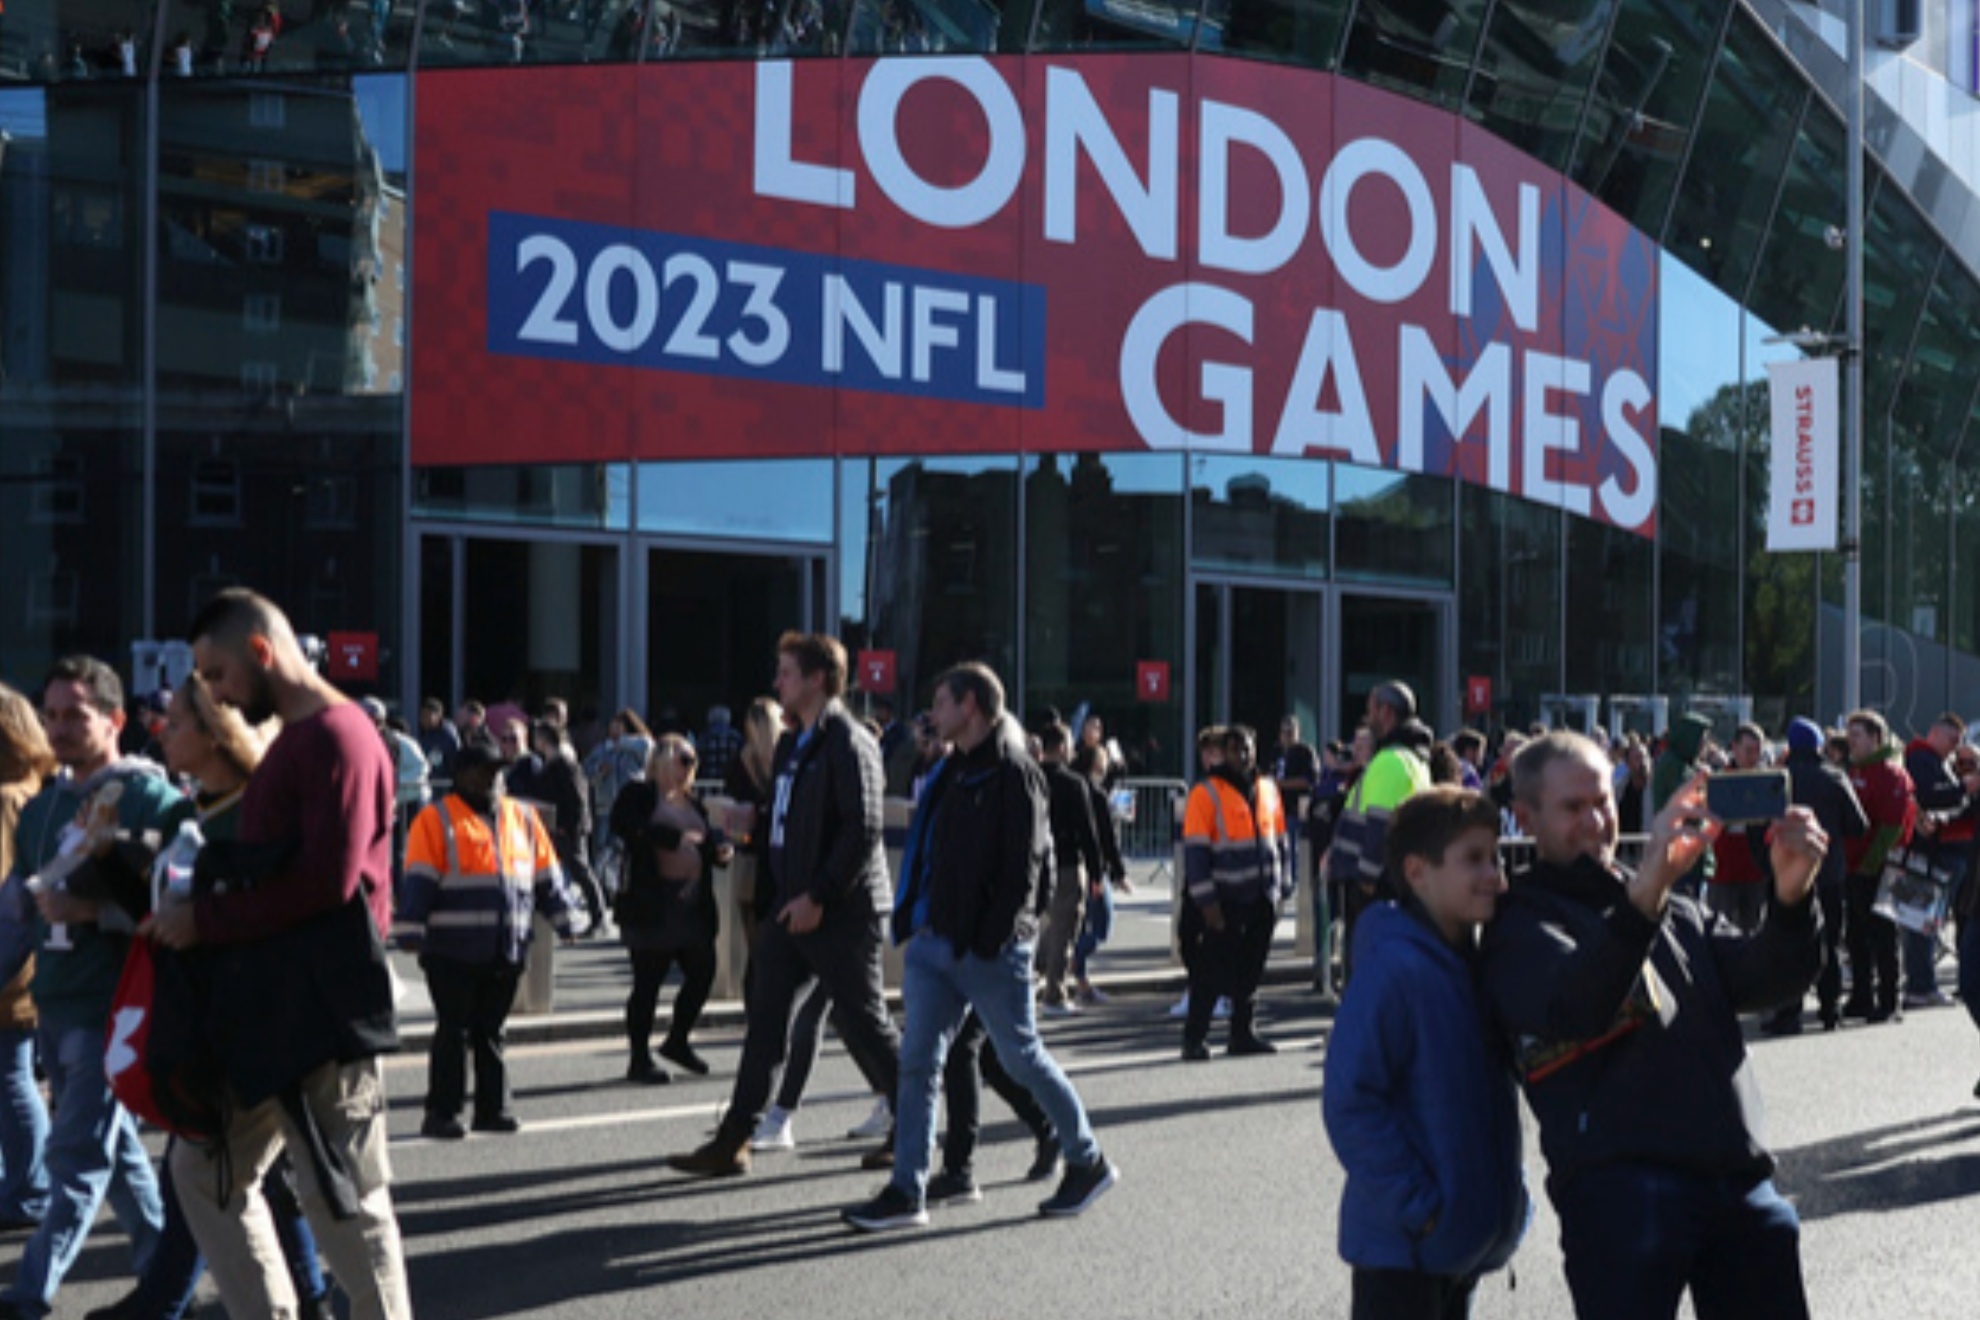 London could eventually host a Super Bowl according to NFL Commissioner Roger Goodell